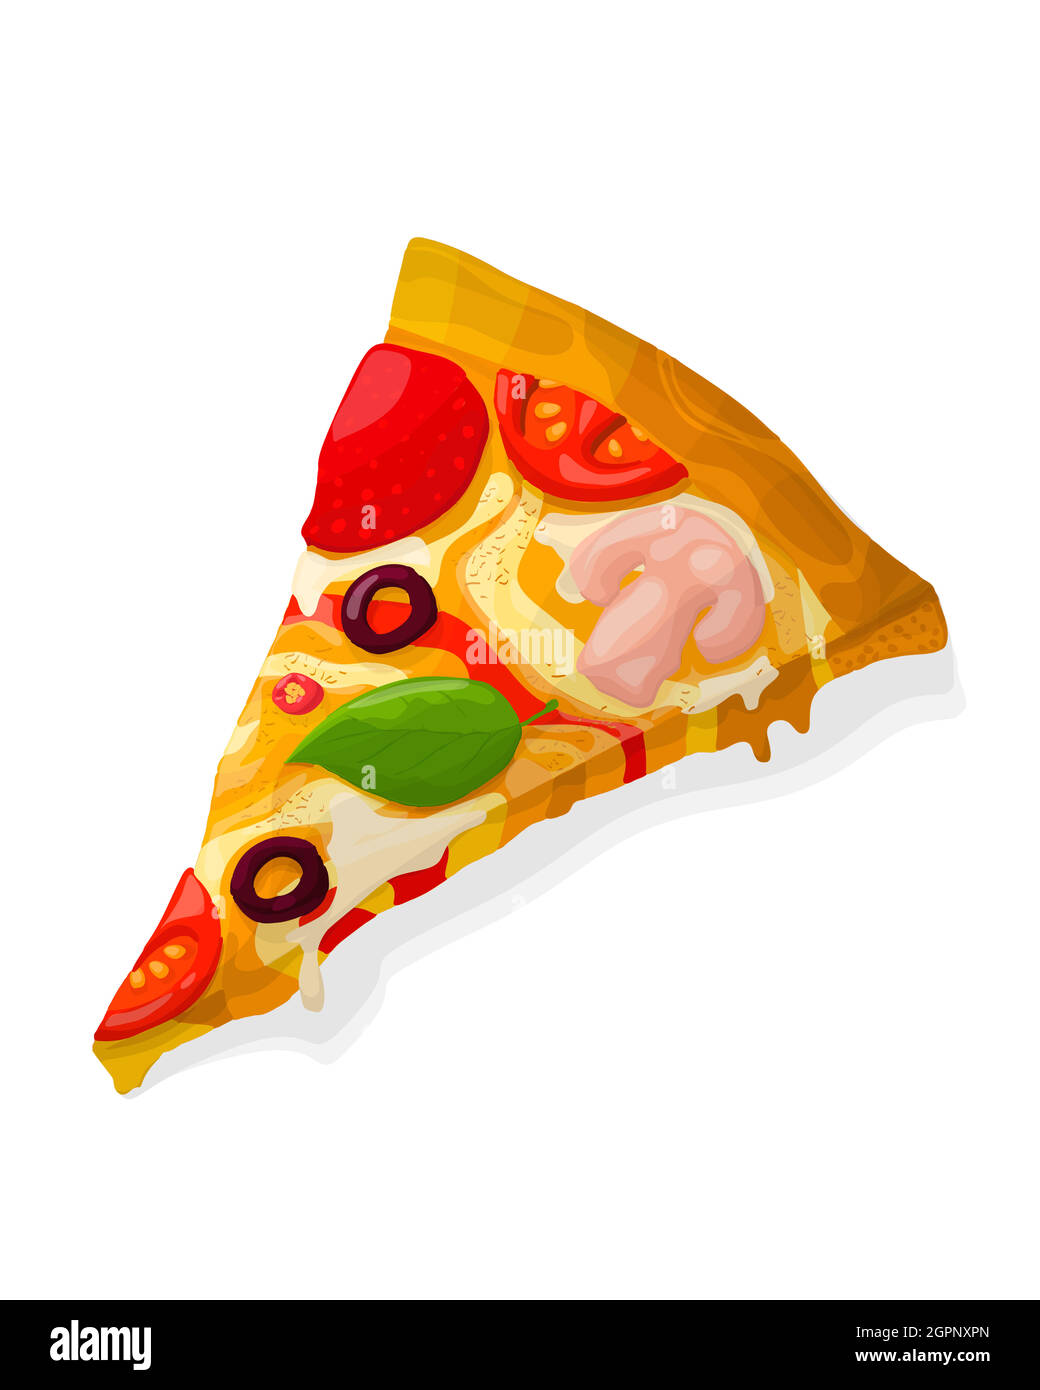 Premium Vector  Pizza with slice cut out vector doodle outline